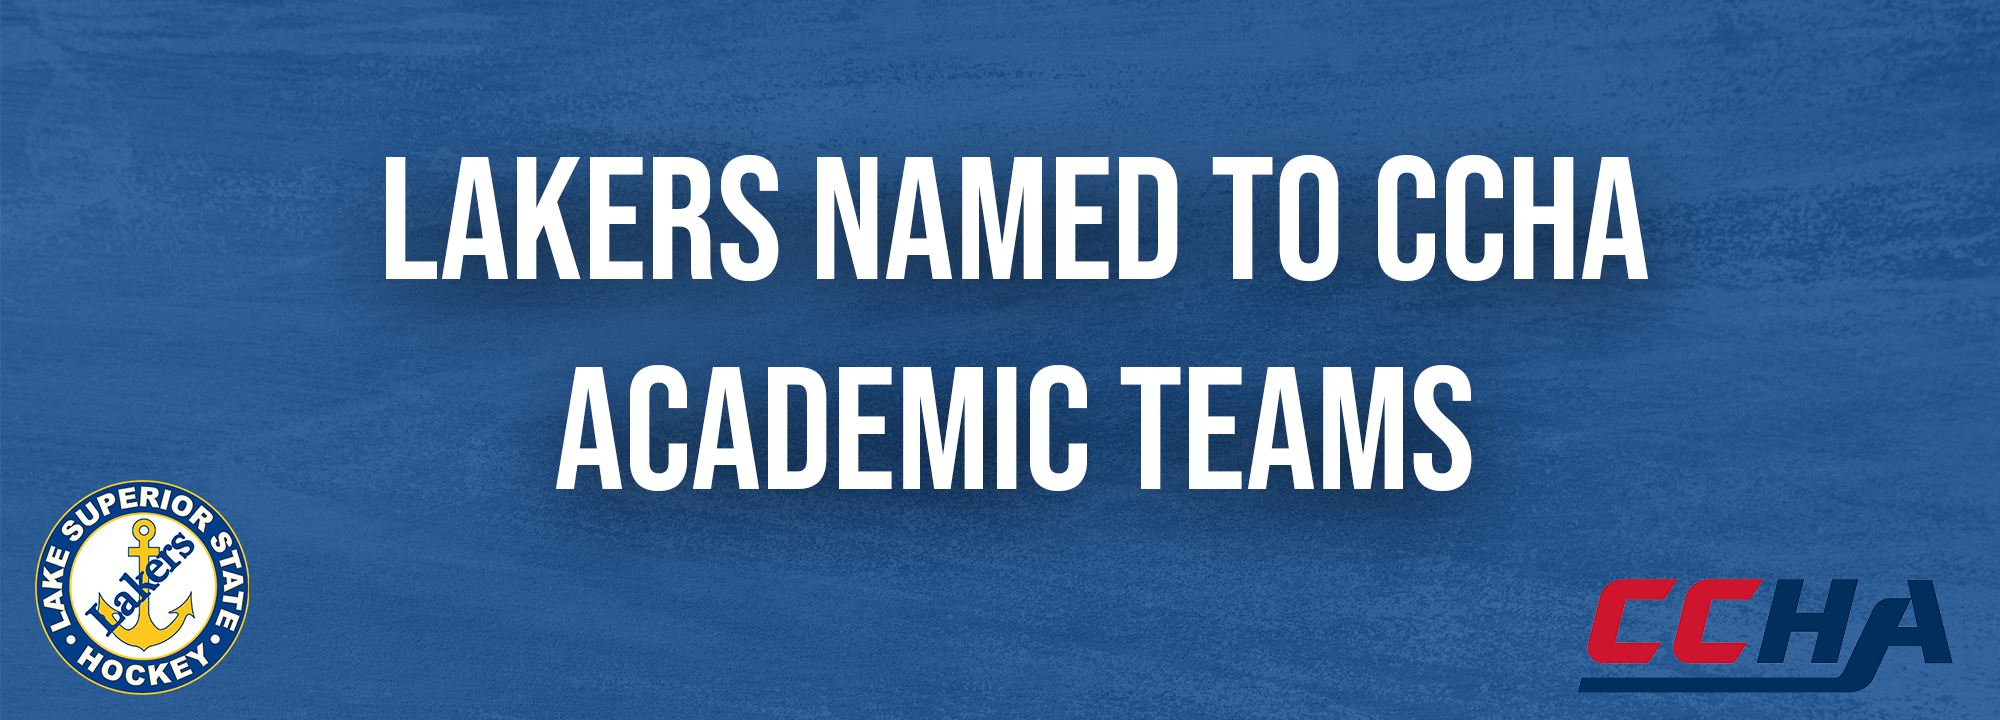 Lakers Named to CCHA Academic Teams